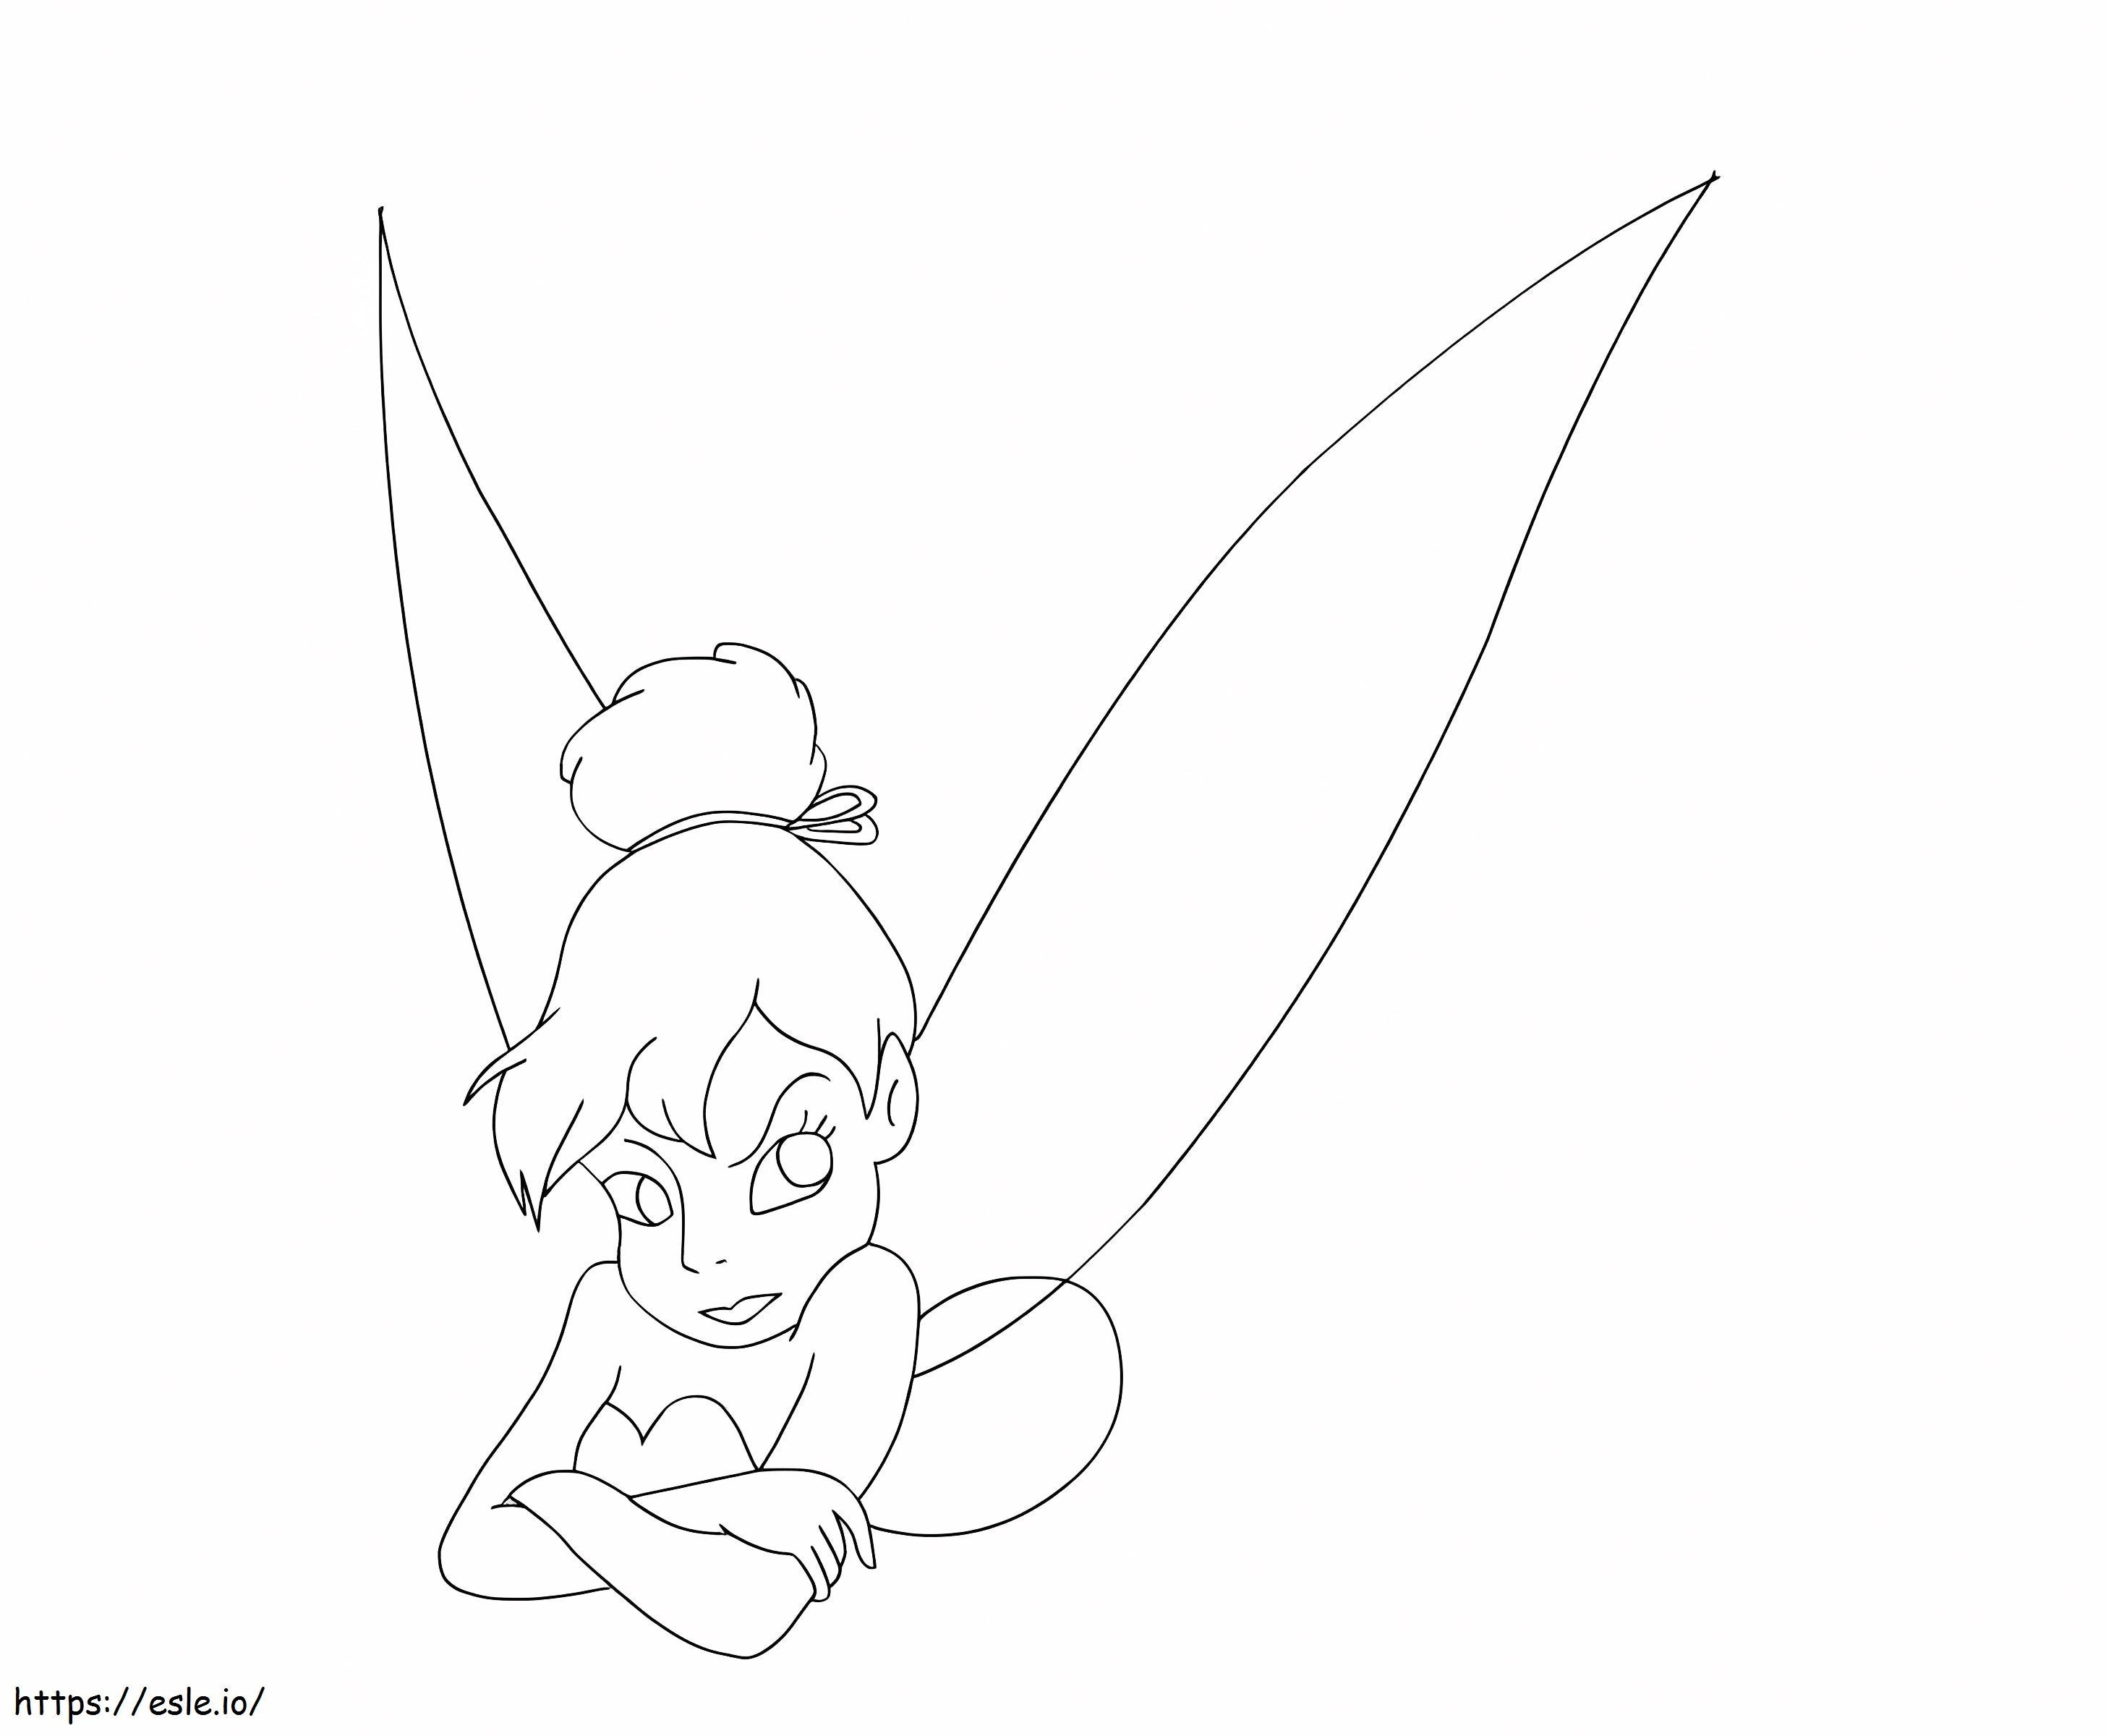 1576228378 Upset Tinkerbell coloring page